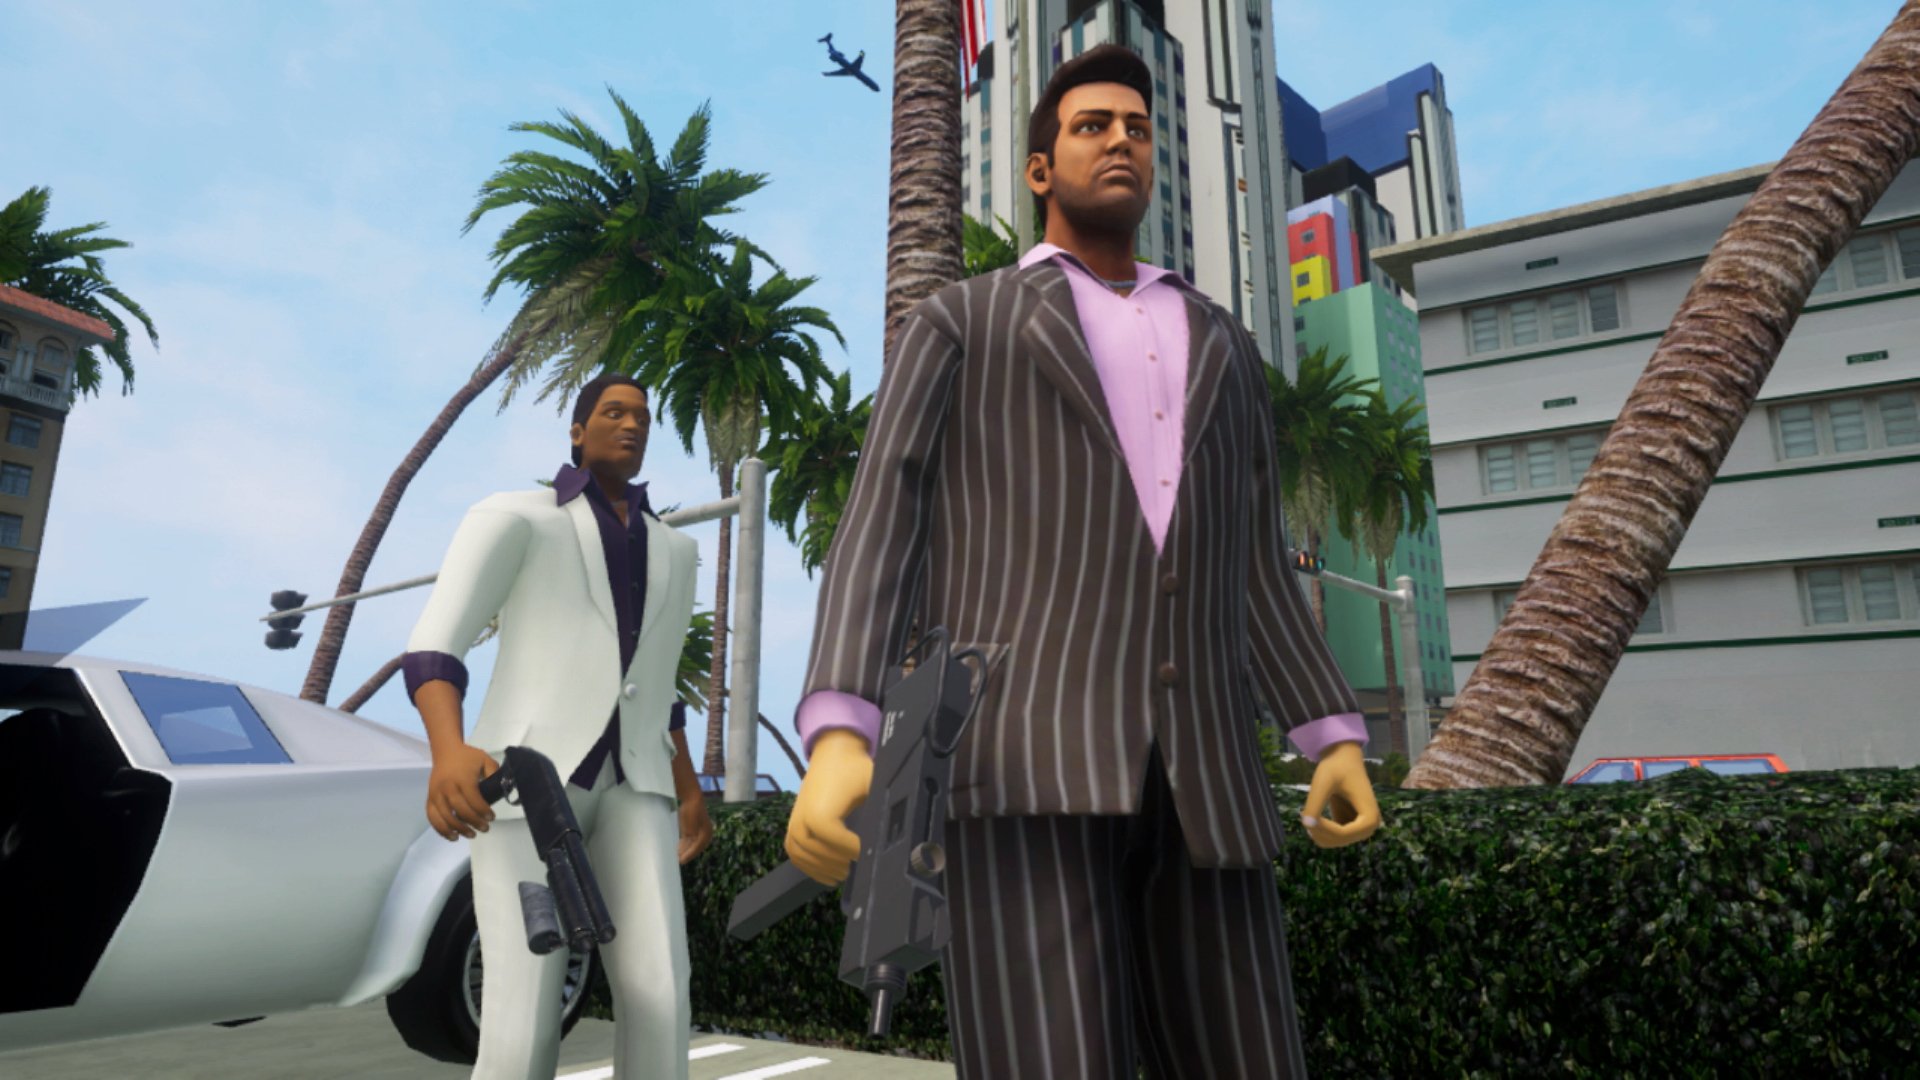 GTA Trilogy Definitive Edition remains cursed, physical releases delayed -  Polygon